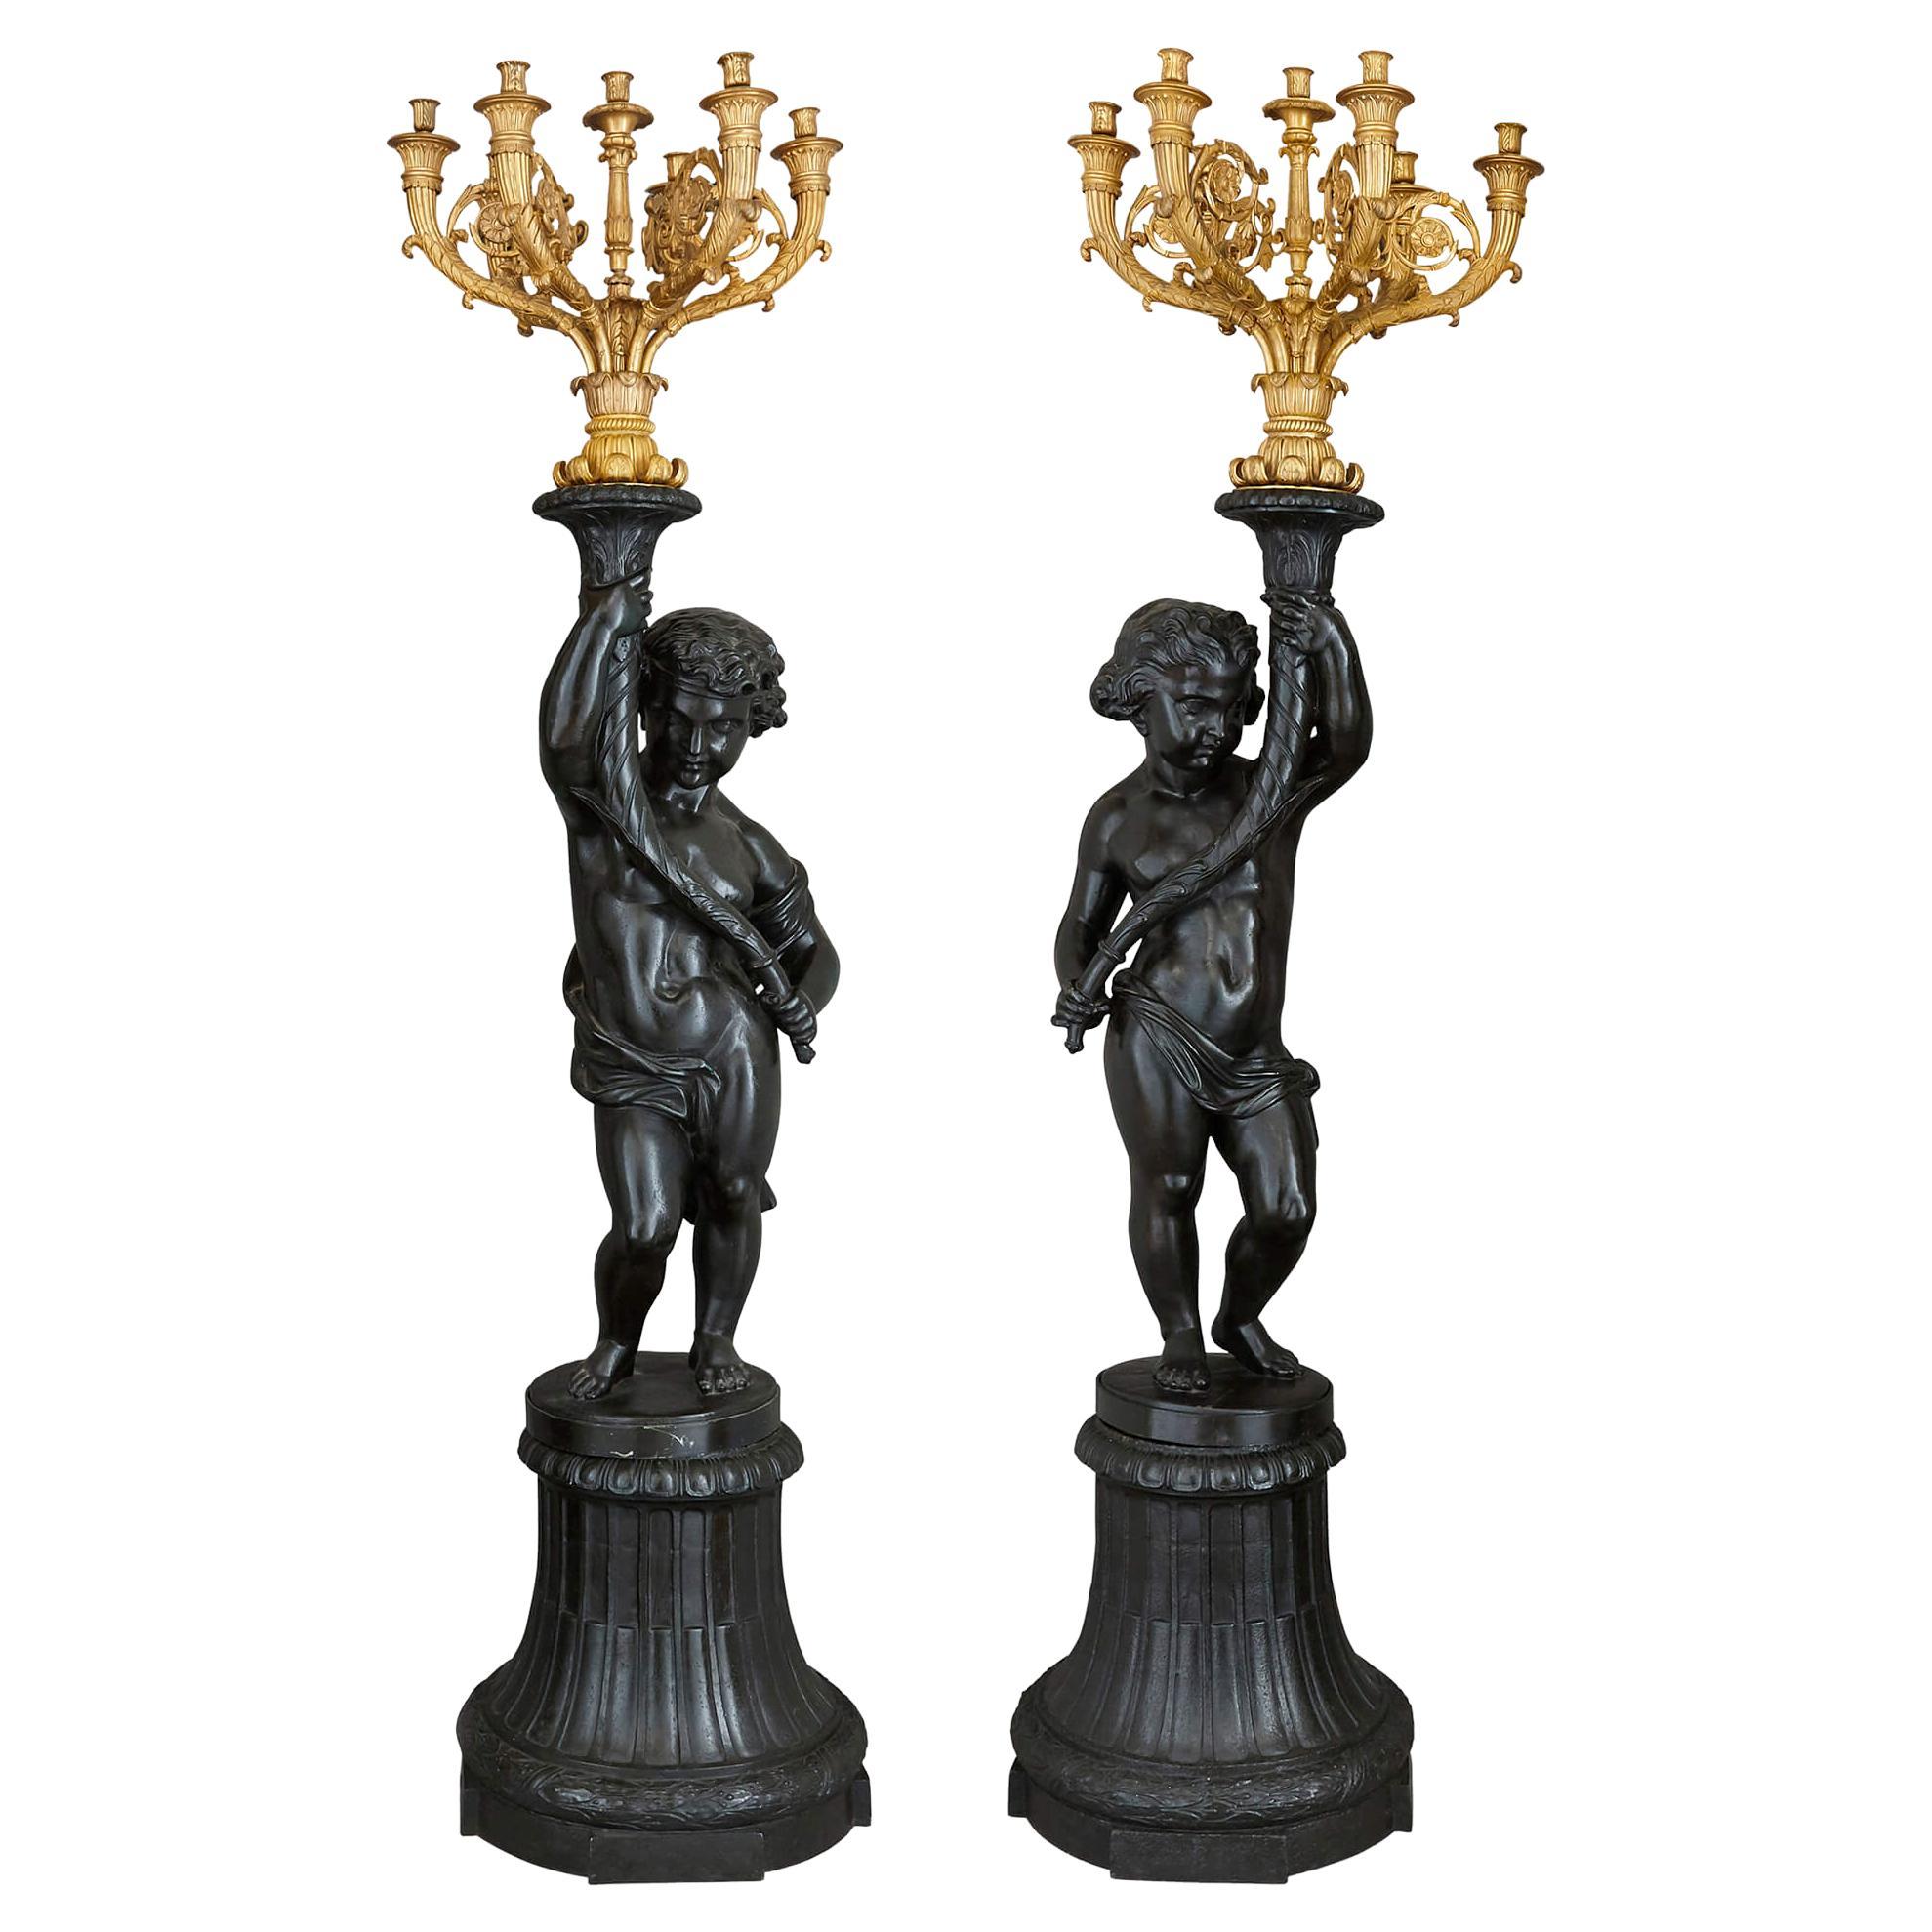 Pair of Antique Monumental Cast Iron and Gilt Bronze Candelabra For Sale